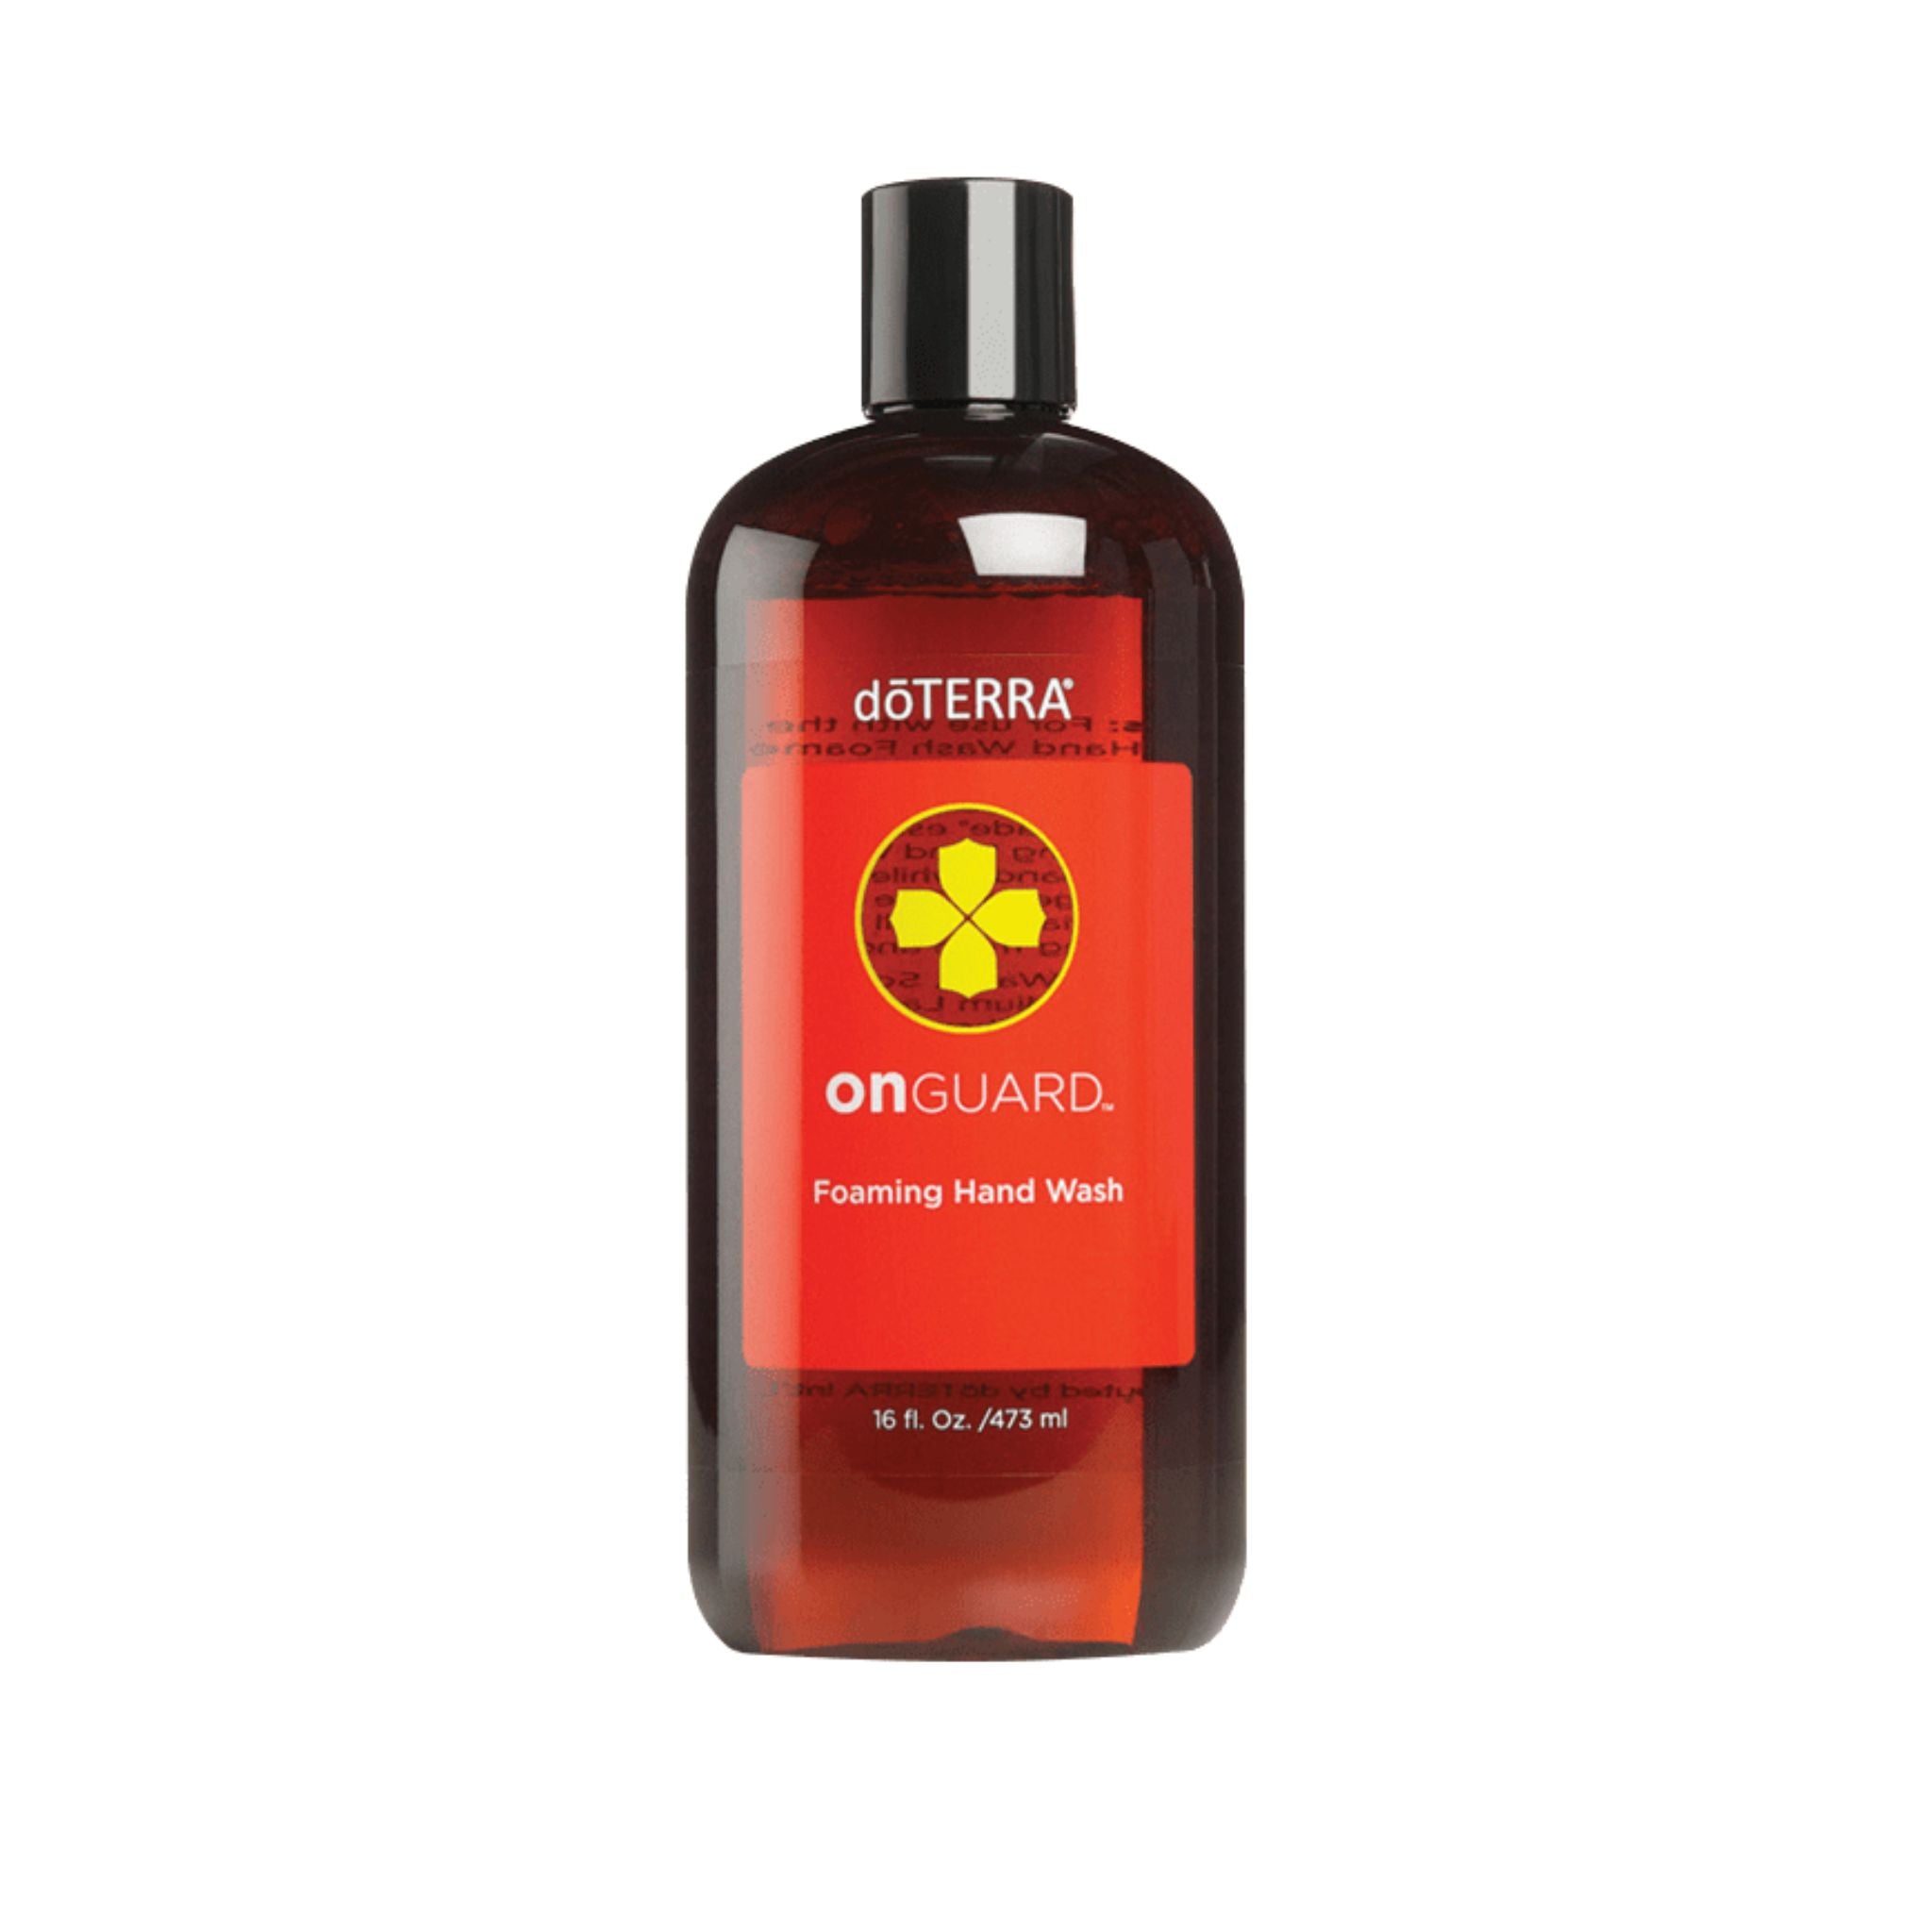 doTERRA On Guard Foaming Hand Wash ( 473 ml) provides the protective benefits of On Guard Essential Oil.